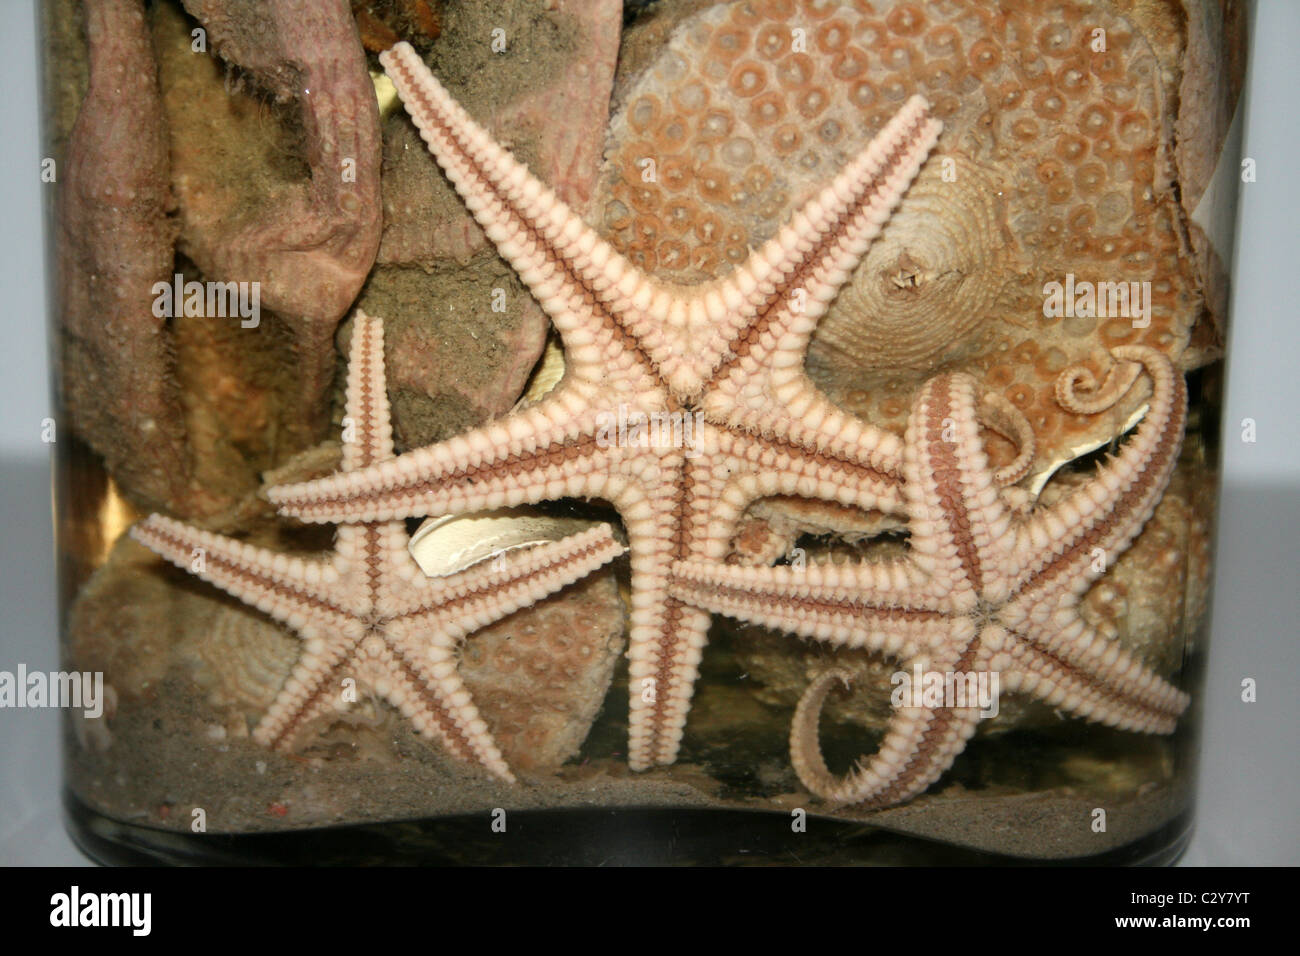 Dead Starfish Preserved In Formaldehyde In A Glass Jar Stock Photo